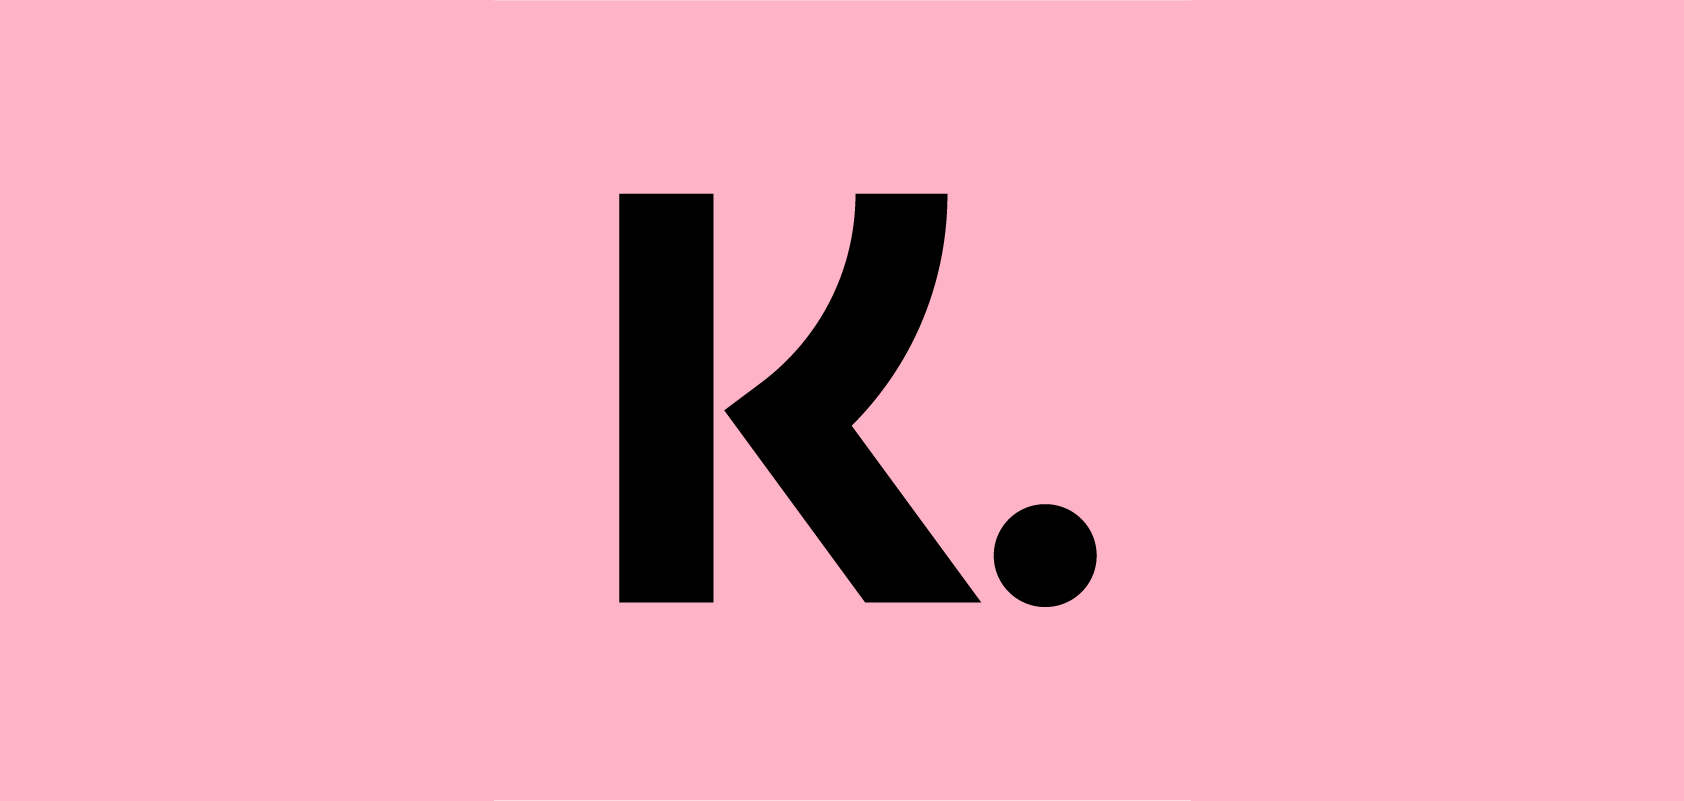 Klarna launches in Australia - Smoooth shopping available at any online retailer